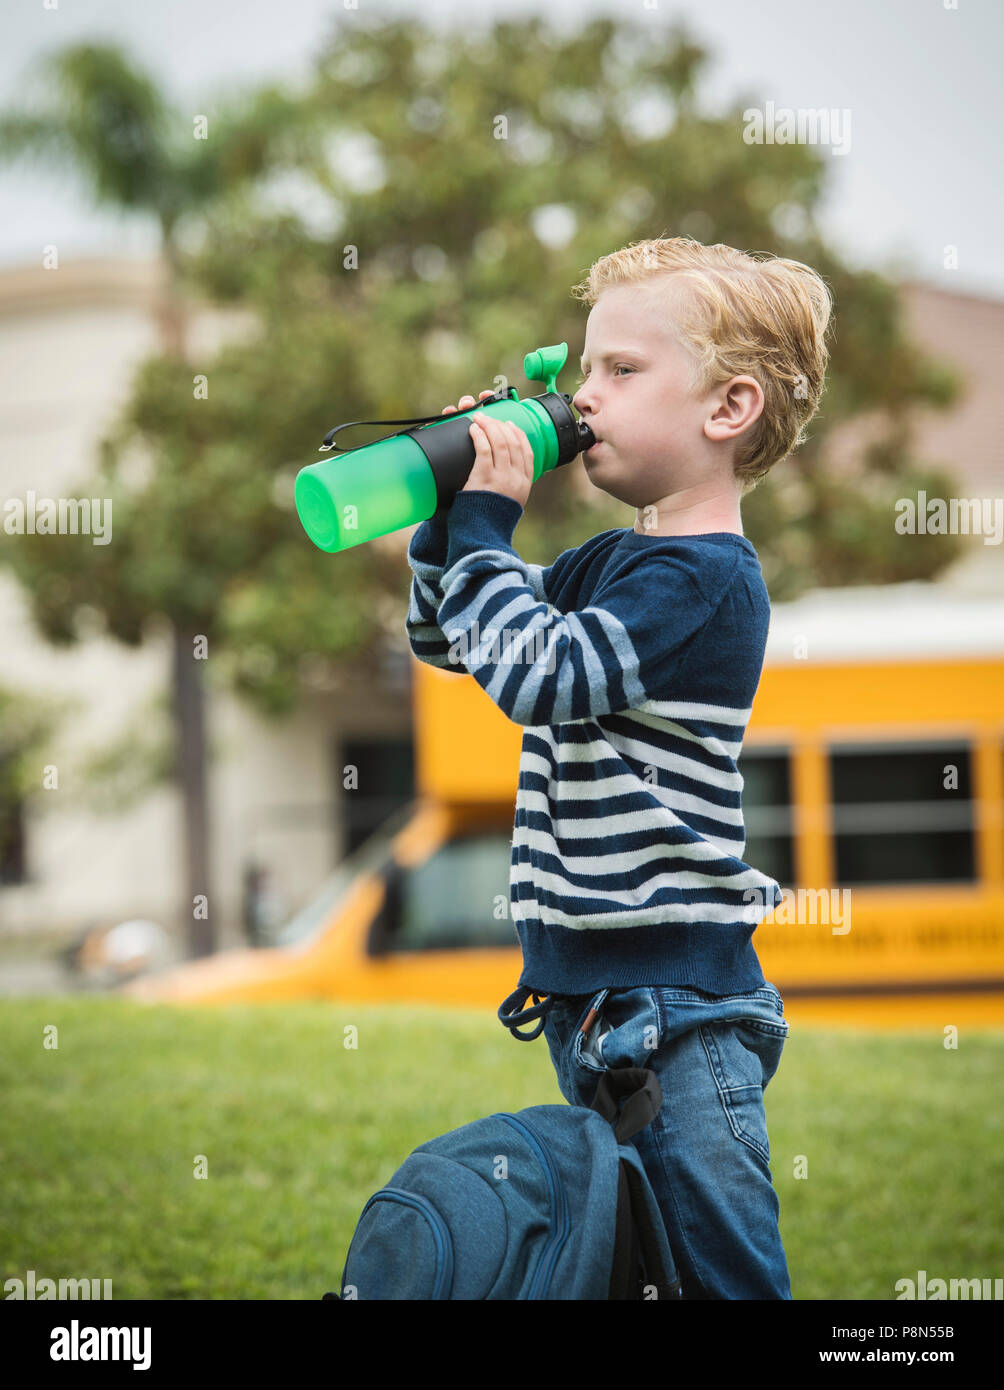 Boy drinking from bottle Banque D'Images